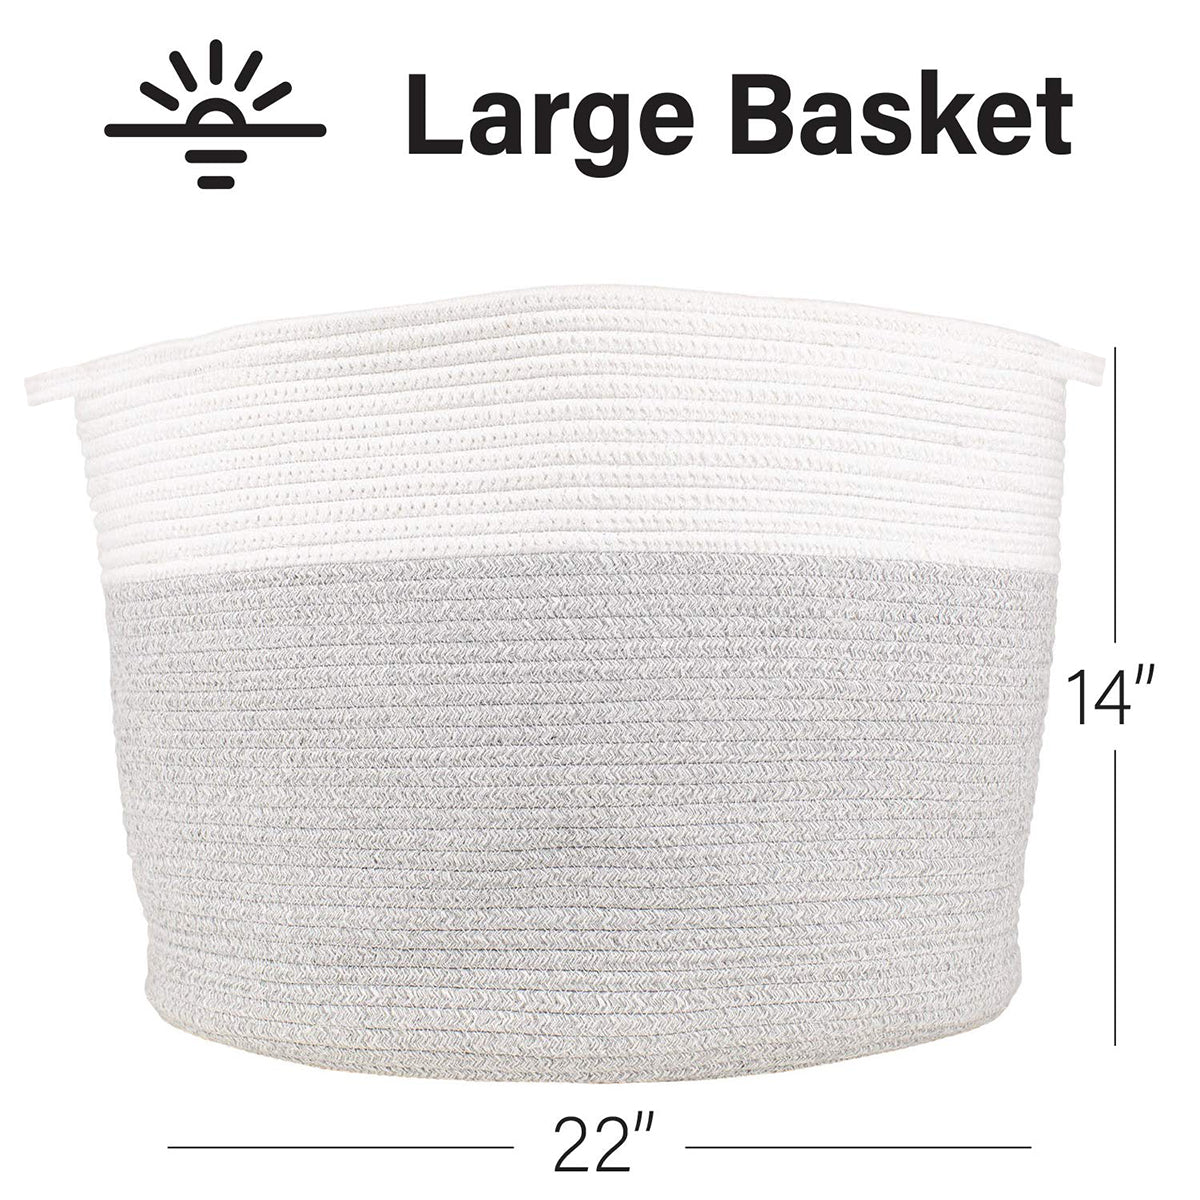 2pc Set Large Cotton Woven Baskets for Blankets, Clothing, Toys